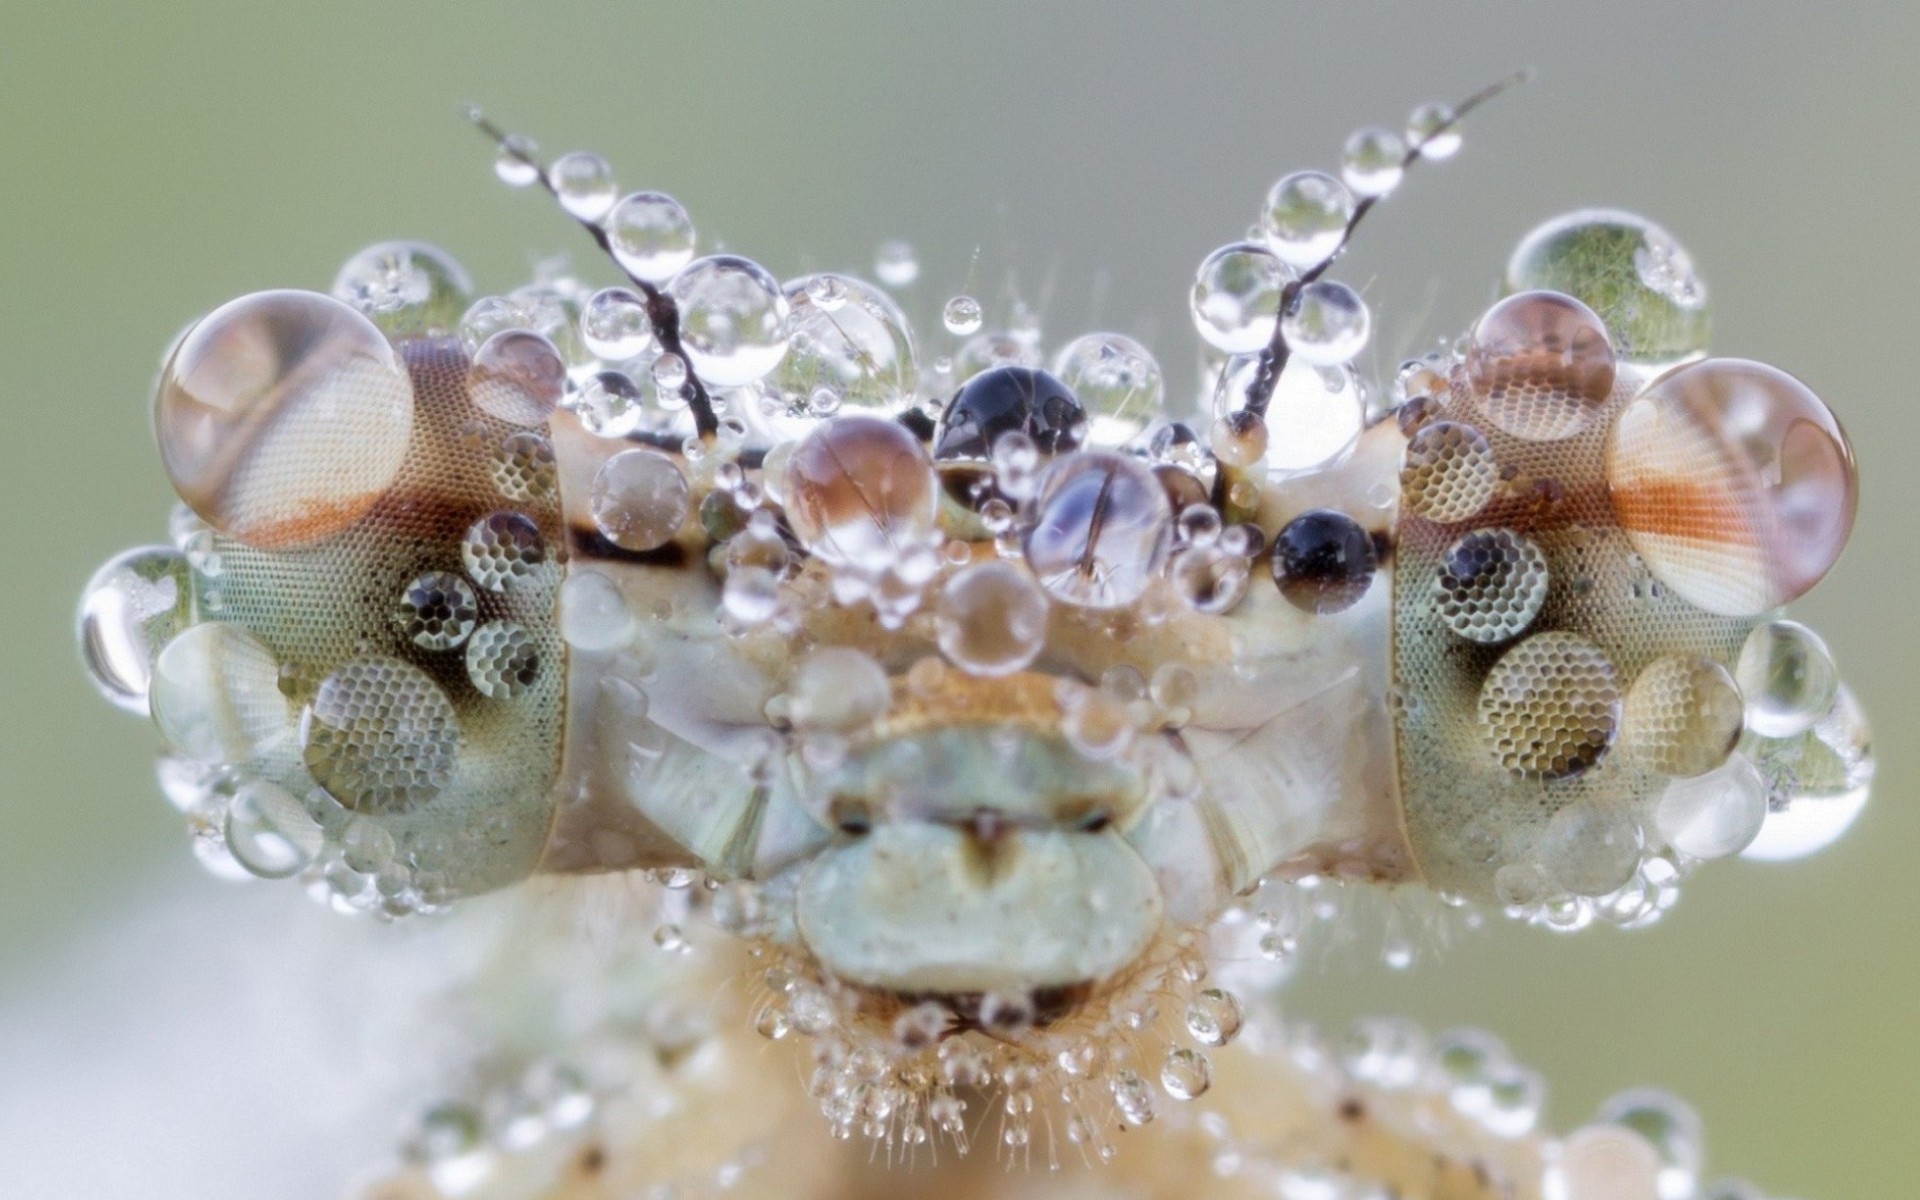 insects, animal, dragonfly, dew, head, macro